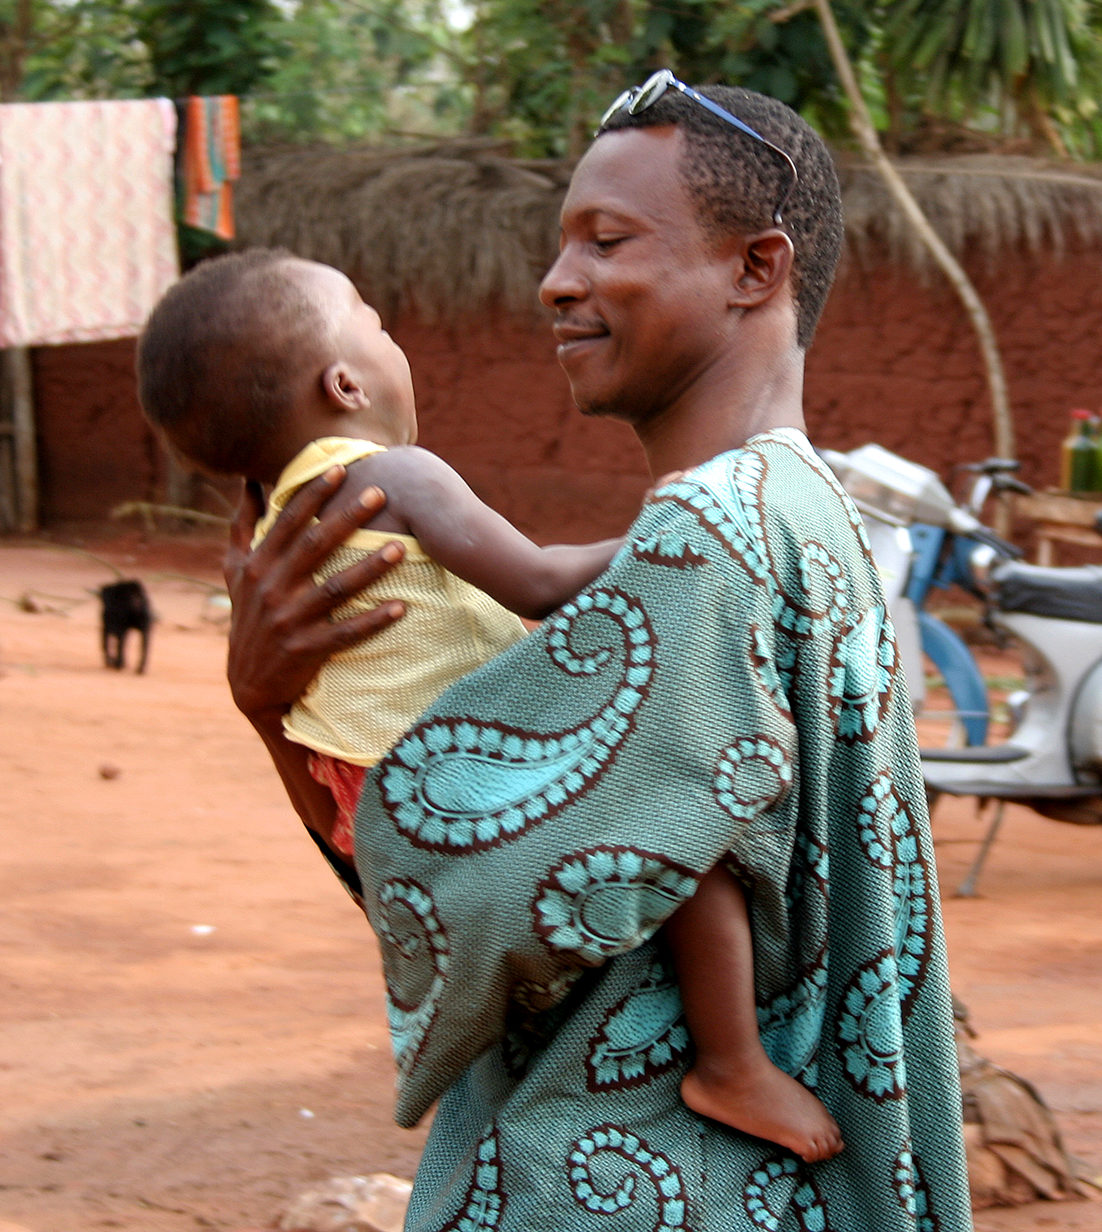 African man holding baby